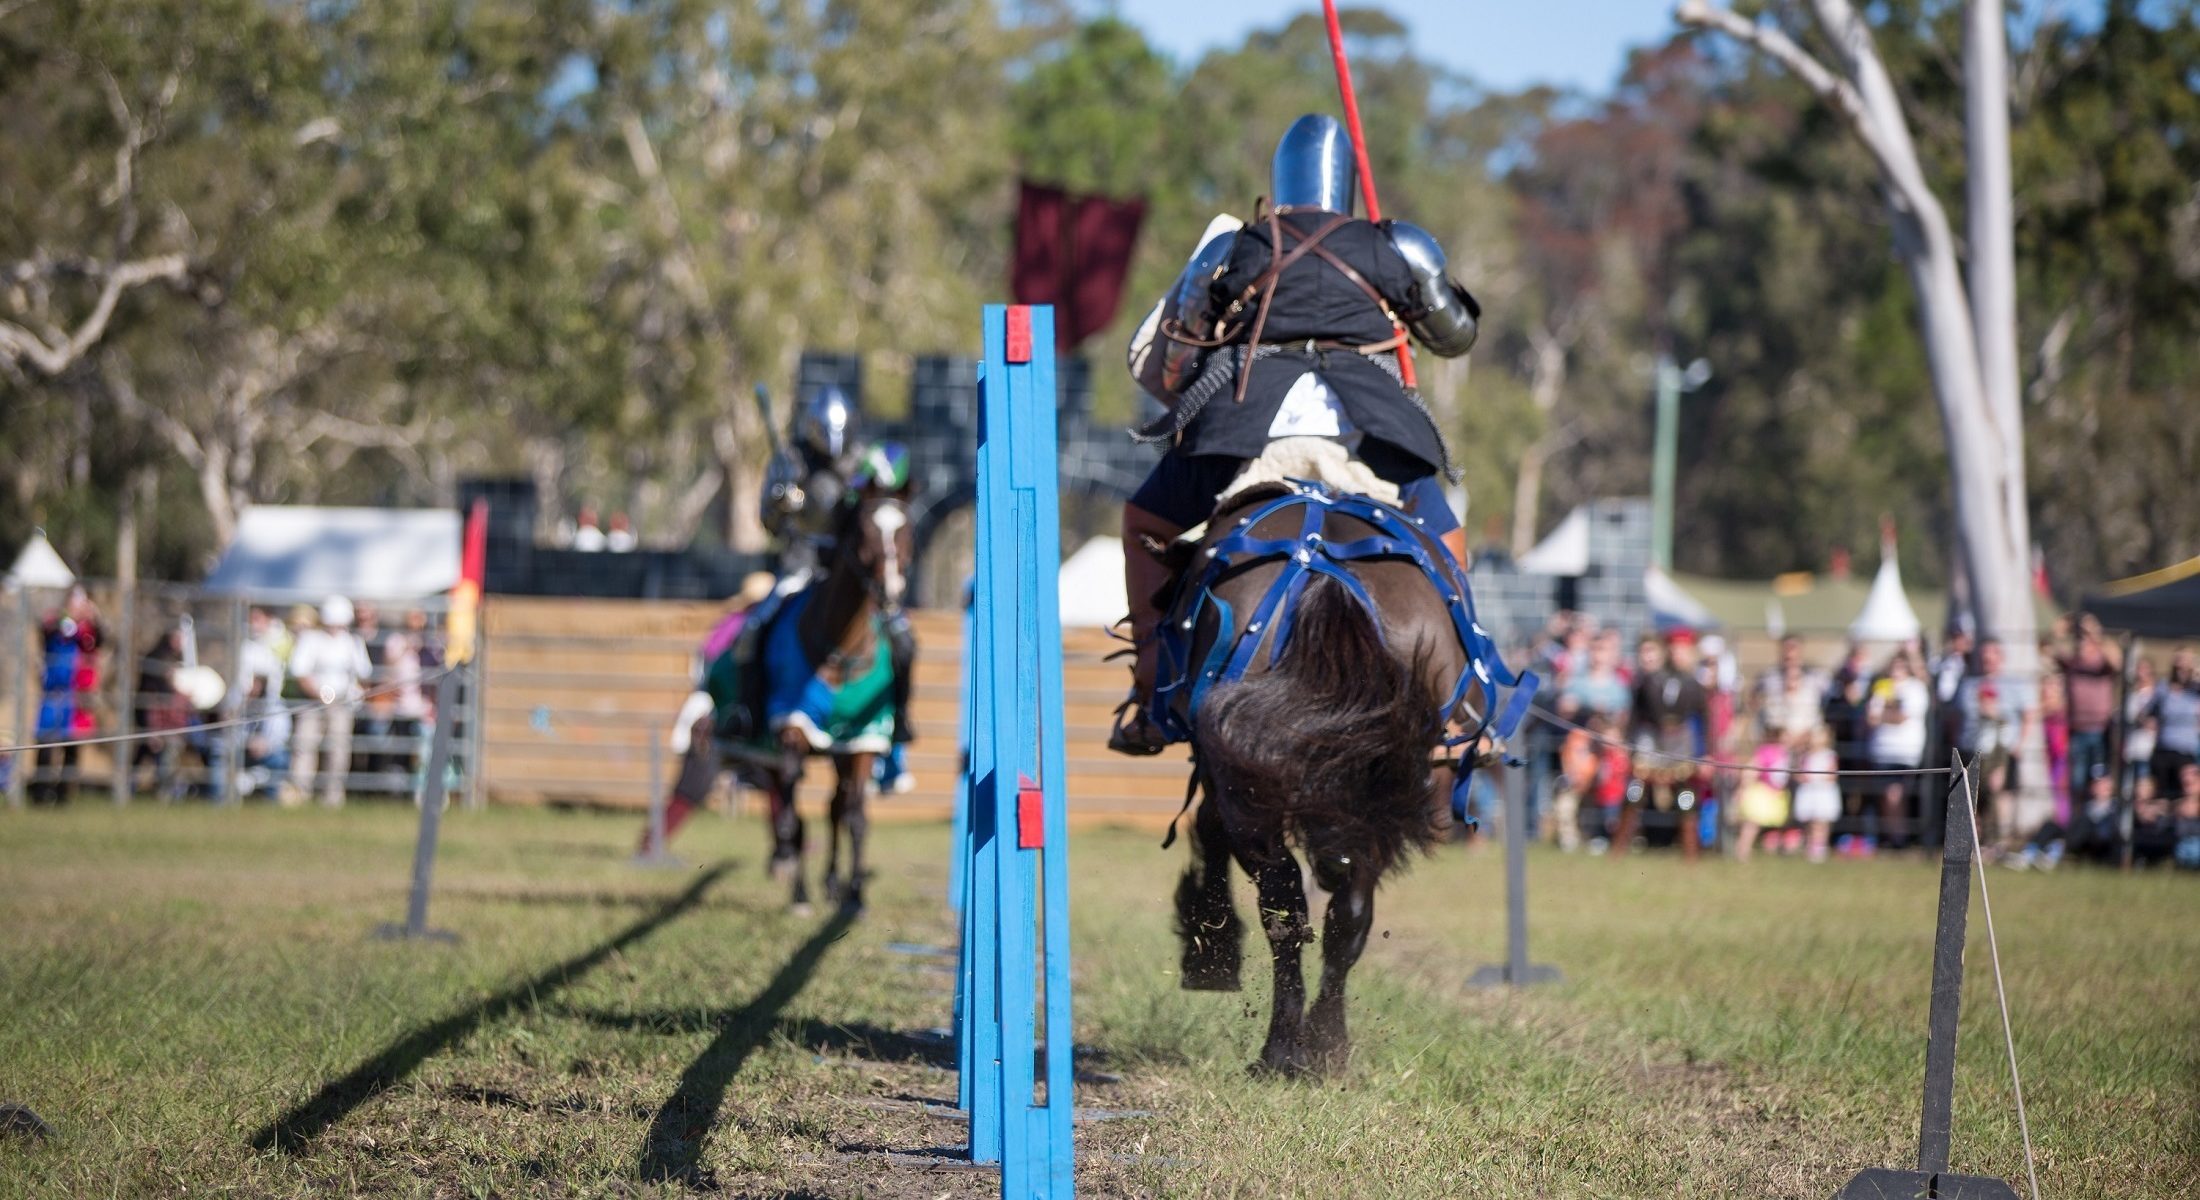 Abbey Medieval Festival jousting tournament with horses